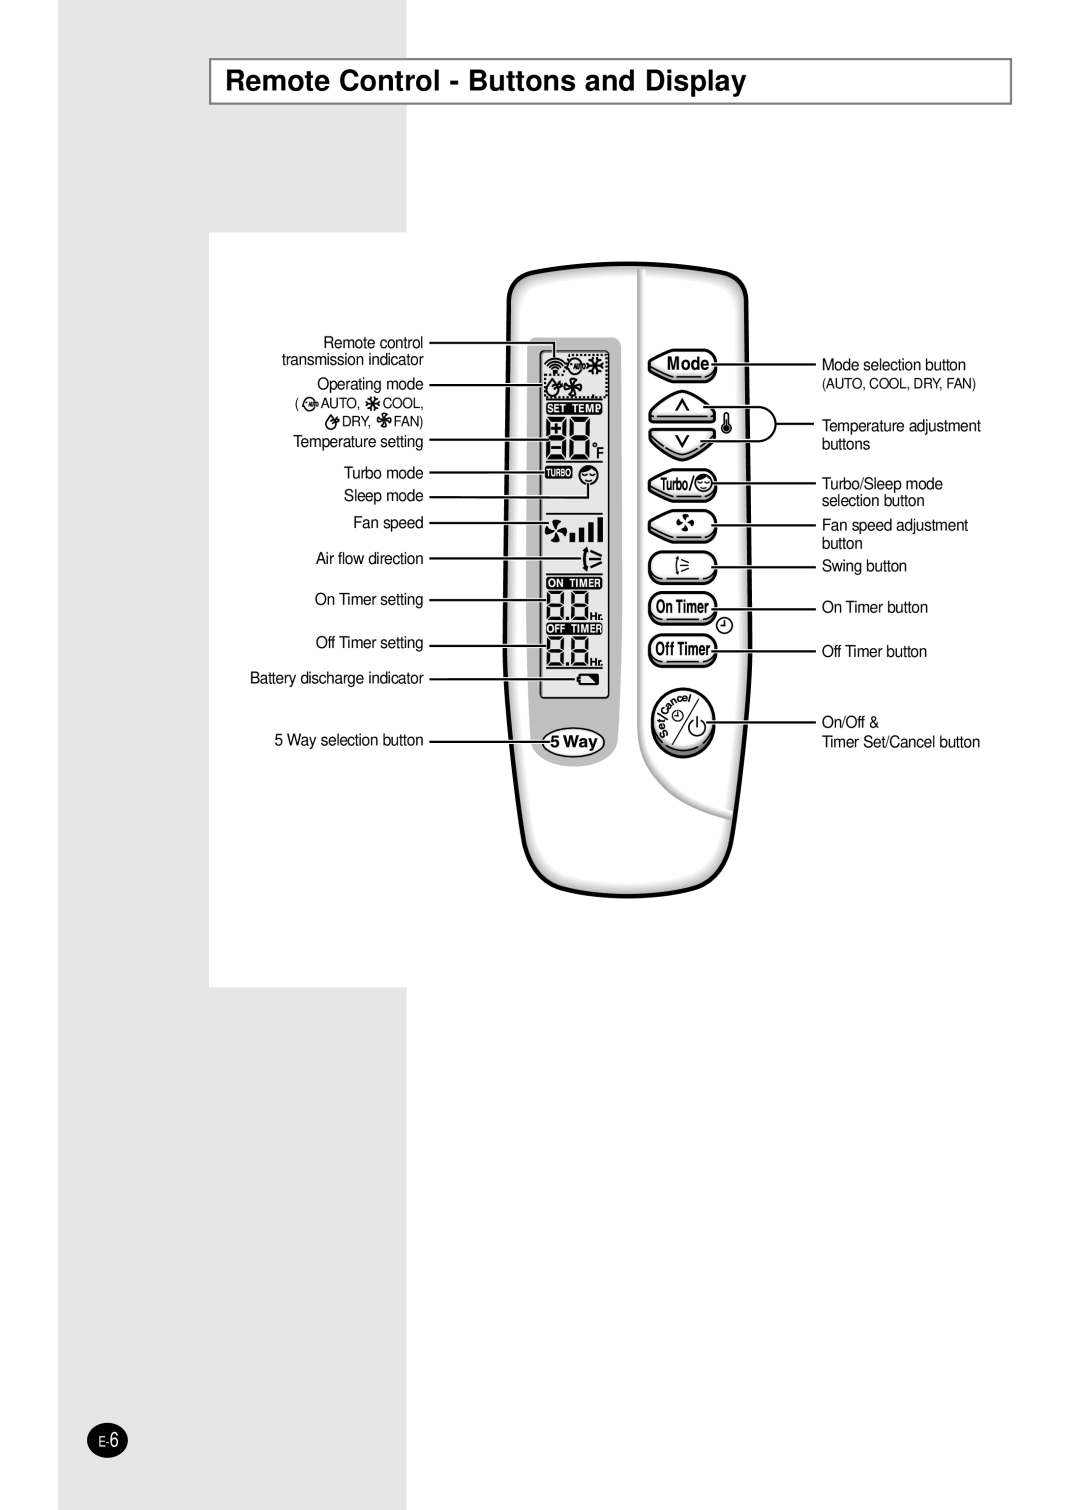 Samsung AM27B1(B2)C13 installation manual Remote Control - Buttons and Display 